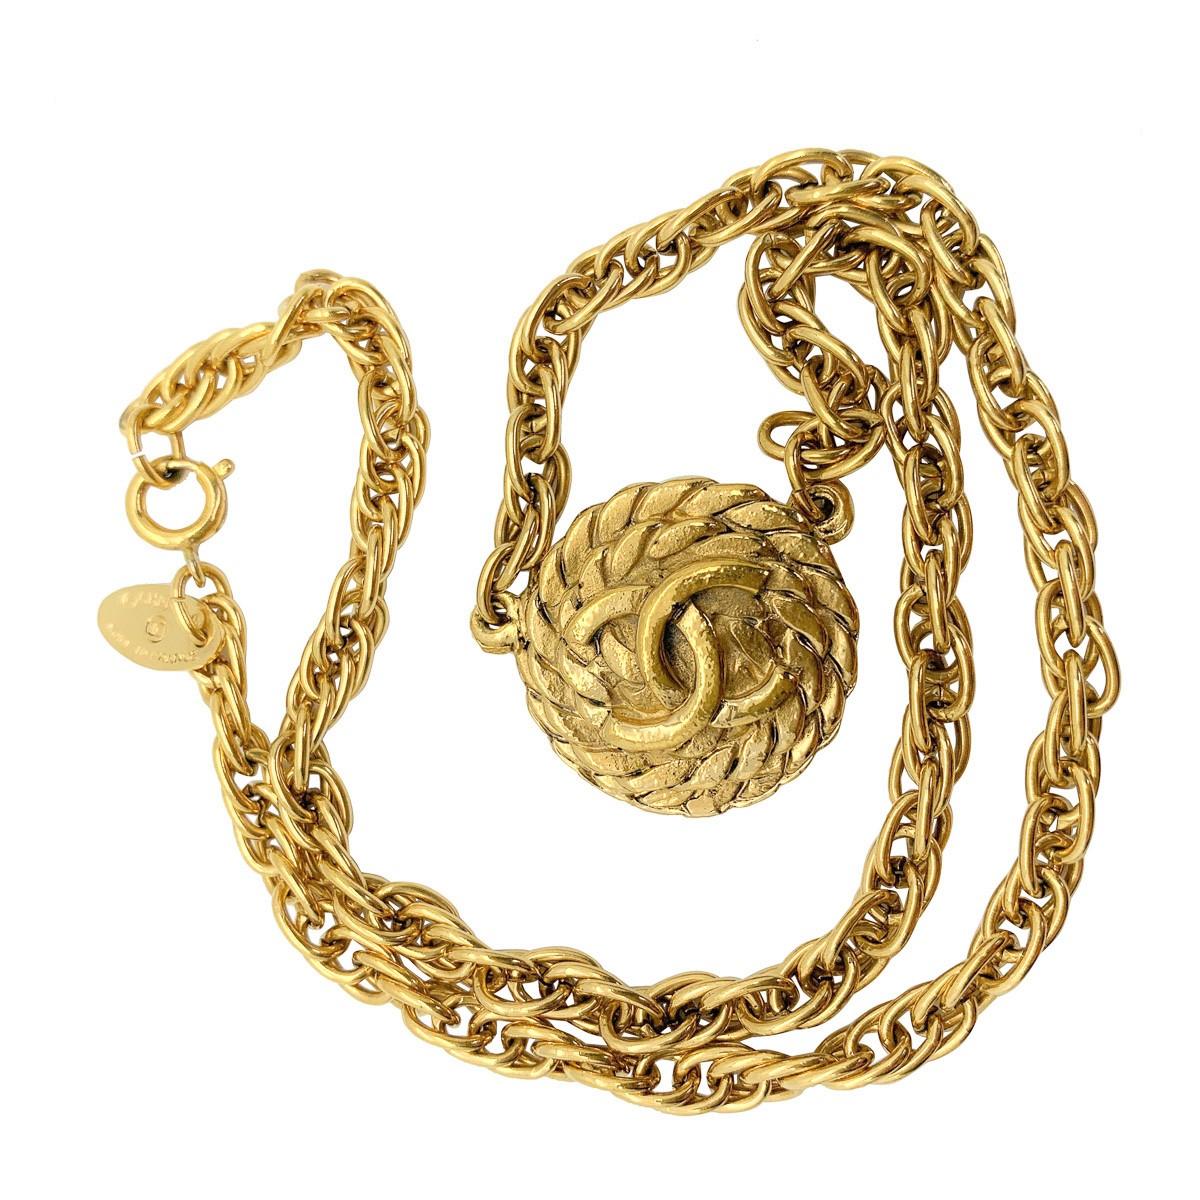 Timeless Vintage Chanel Logo Rope Design Necklace 1980s In Good Condition For Sale In Wilmslow, GB